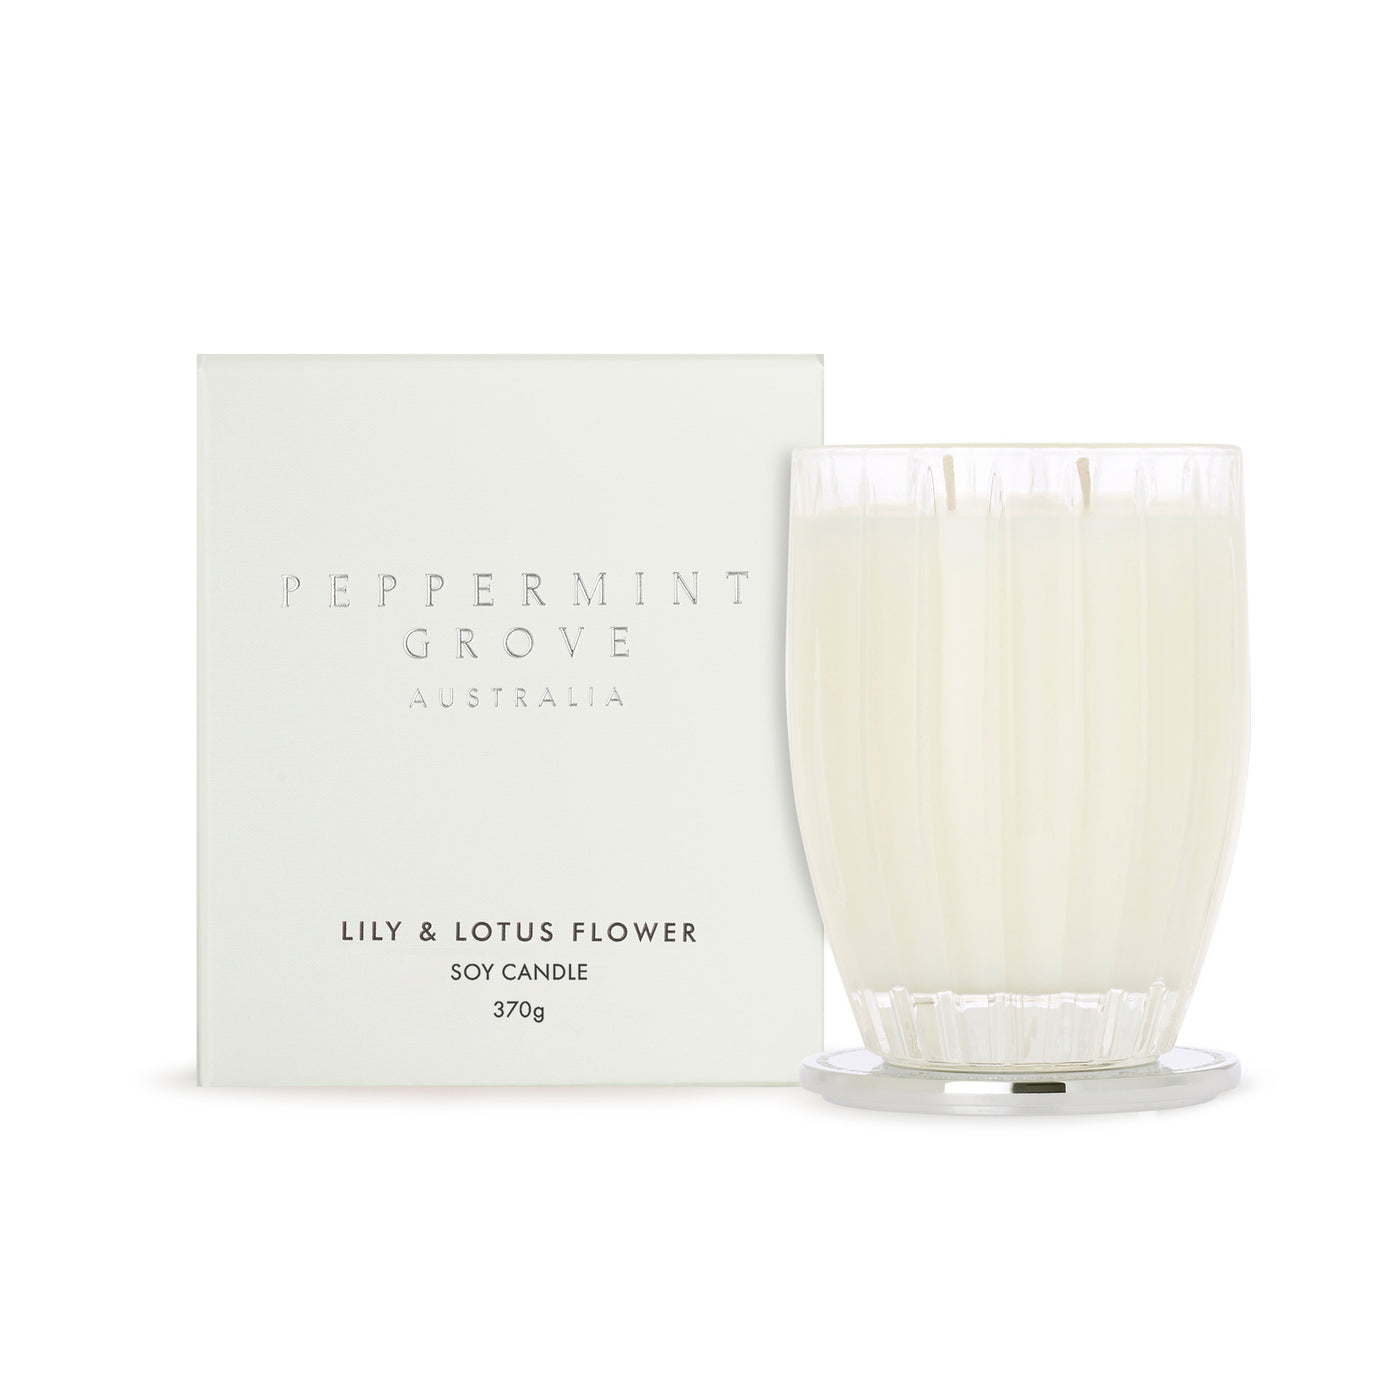 Lily & Lotus Flower Soy Candle- Peppermint Grove